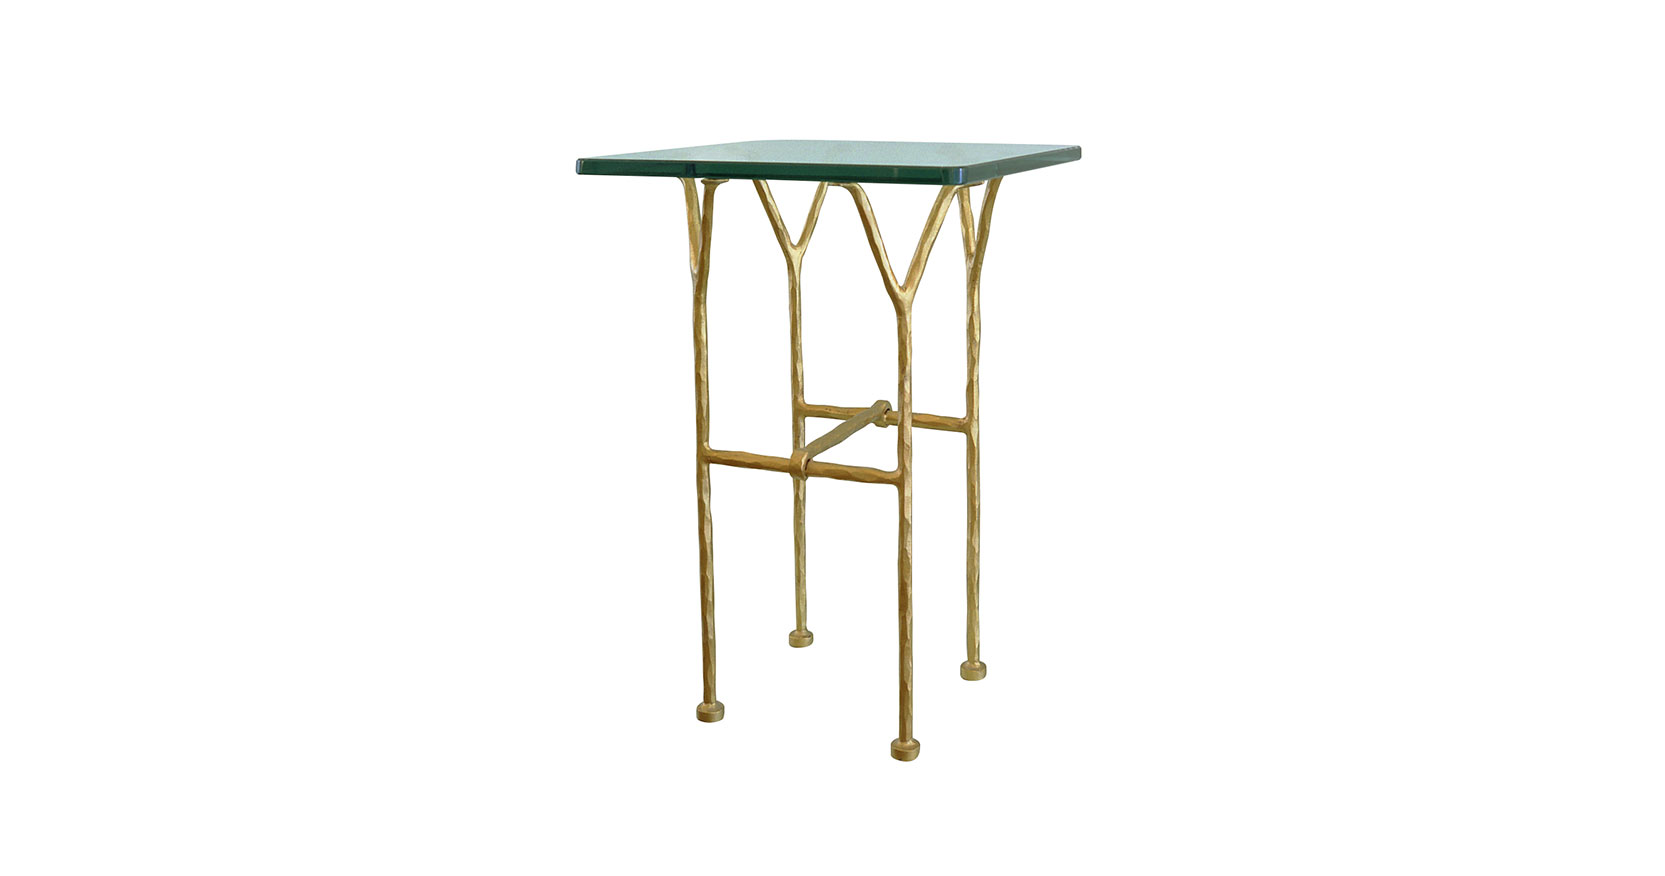 Garouste and Bonetti, small square table, glass top and gold wrought iron legs which divide upwards into two small forks